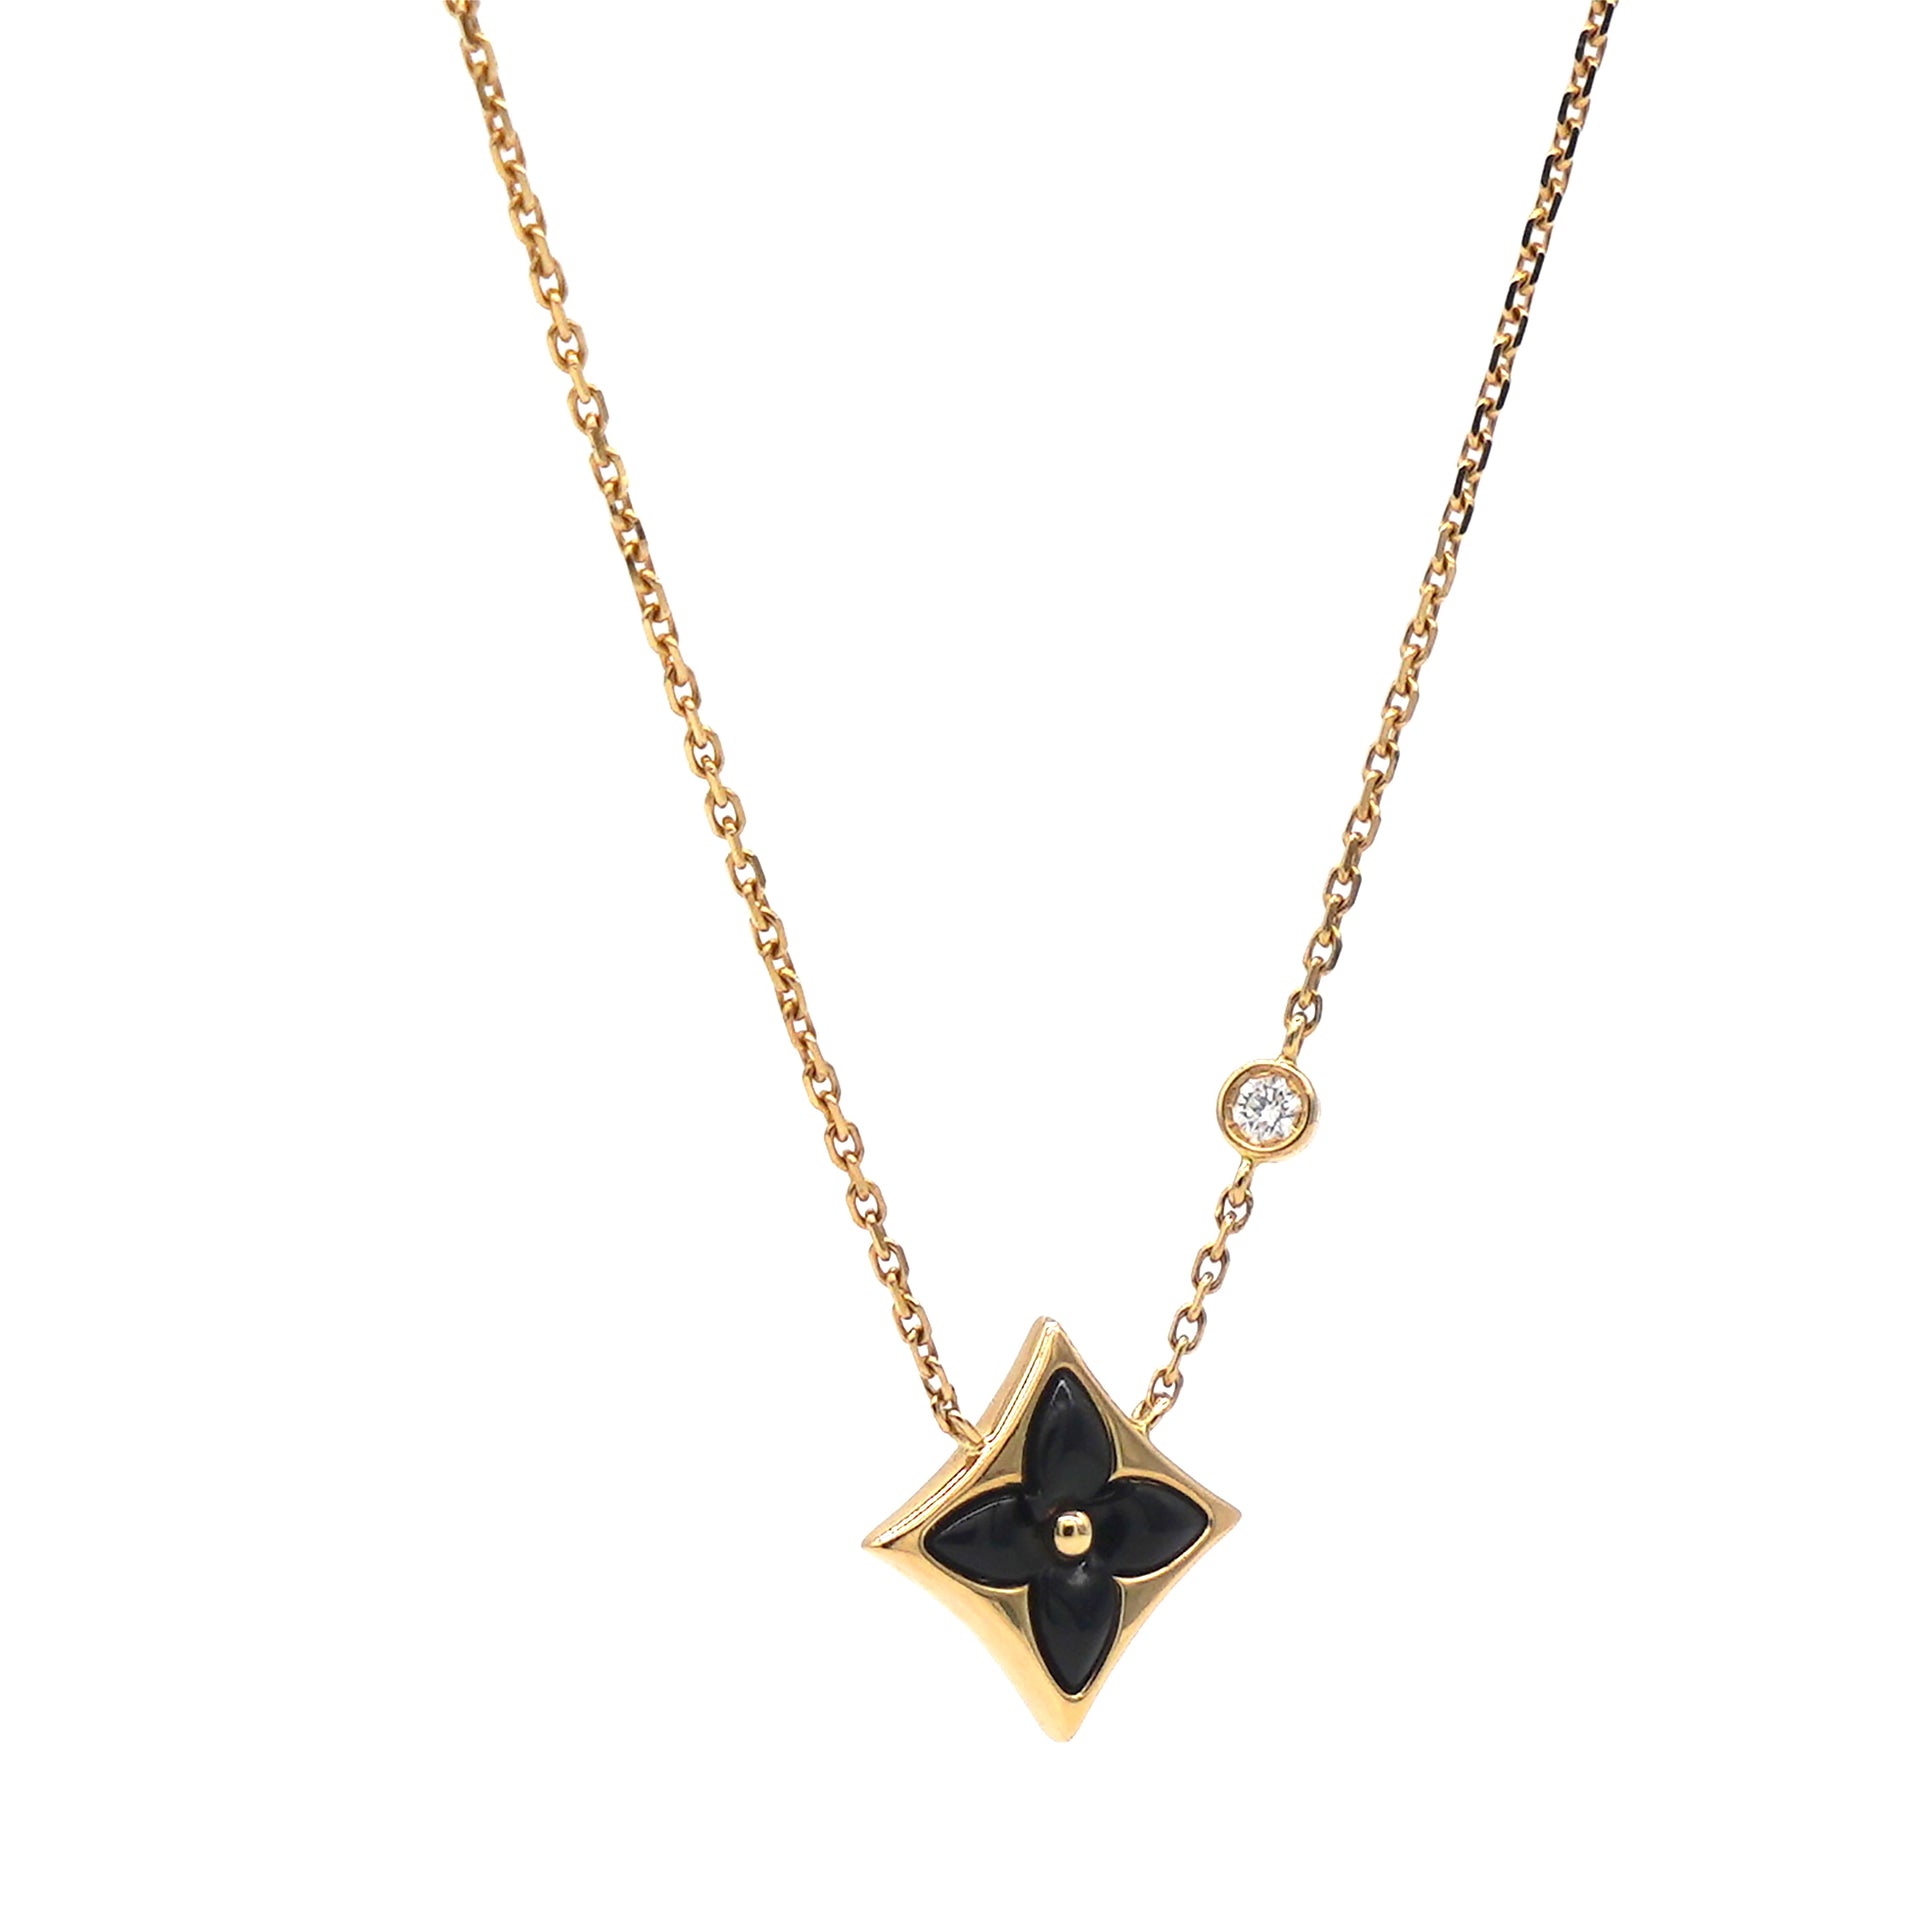 Louis Vuitton Star Blossom Jewelry Collection Reworks Its Logo – Robb Report